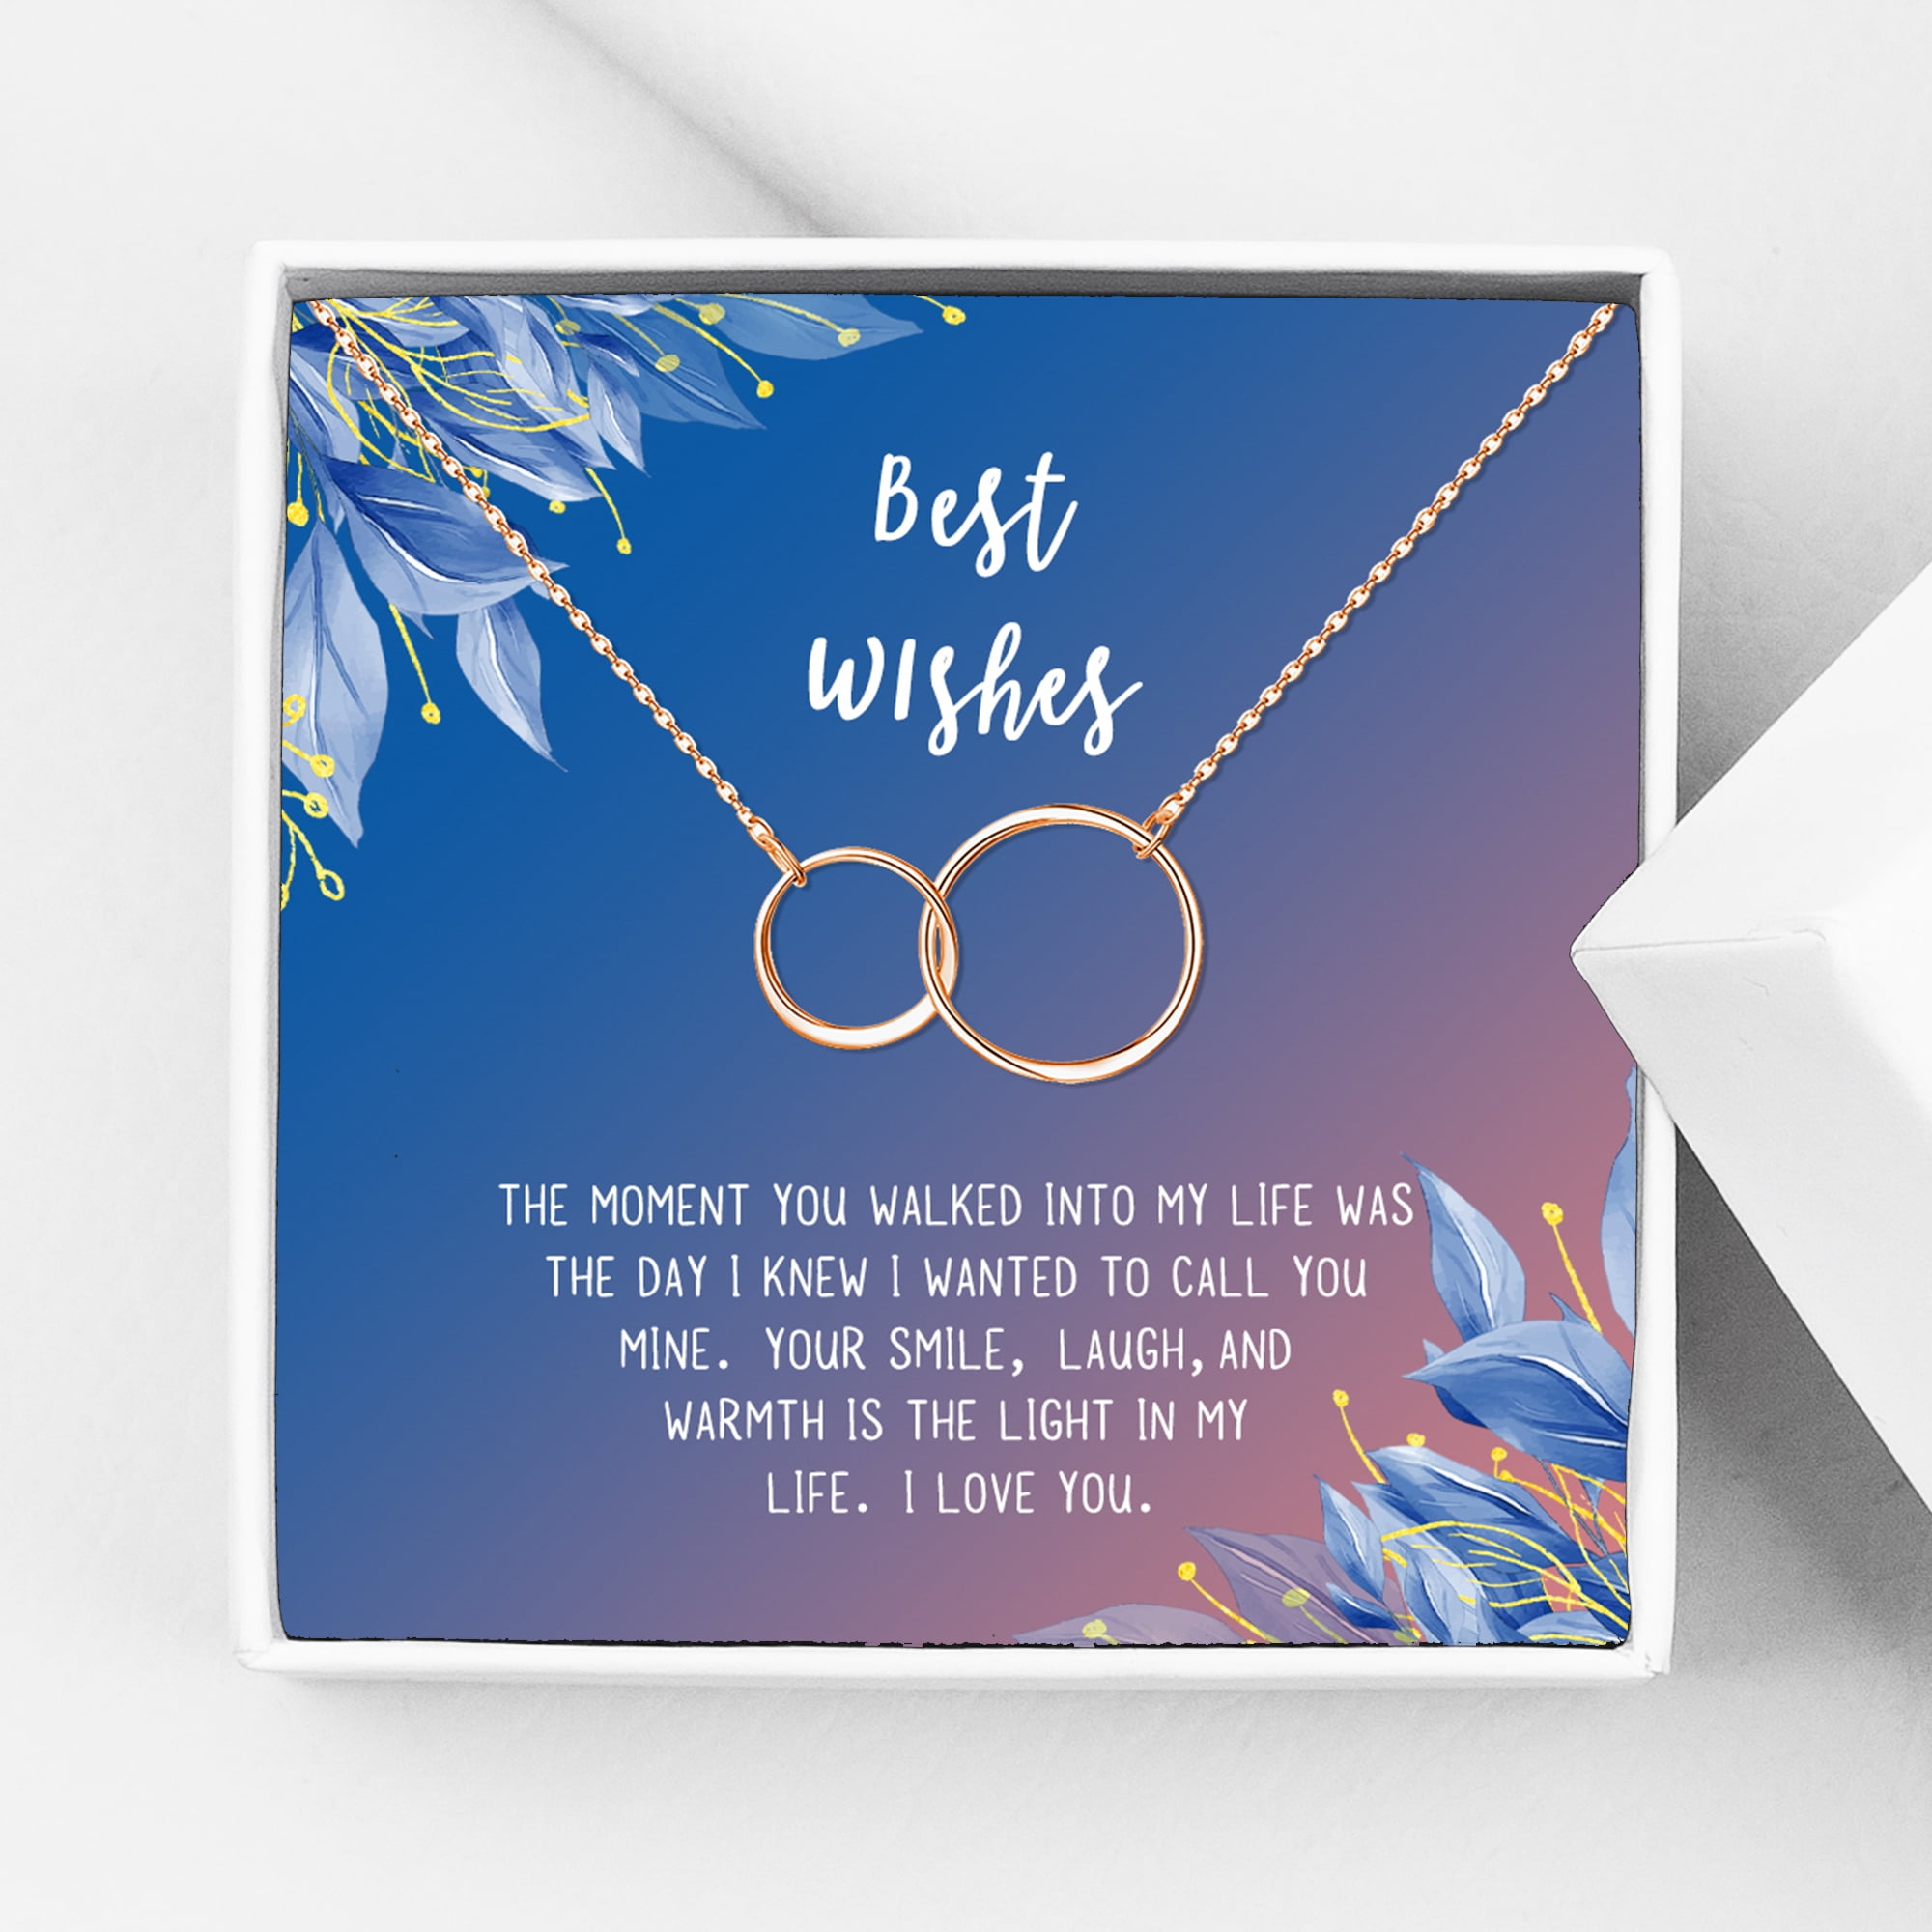 NIECE SILVER PLATED WISH CHARM NECKLACE HEART FLOWER INFINITY GIFT CARD PRESENT